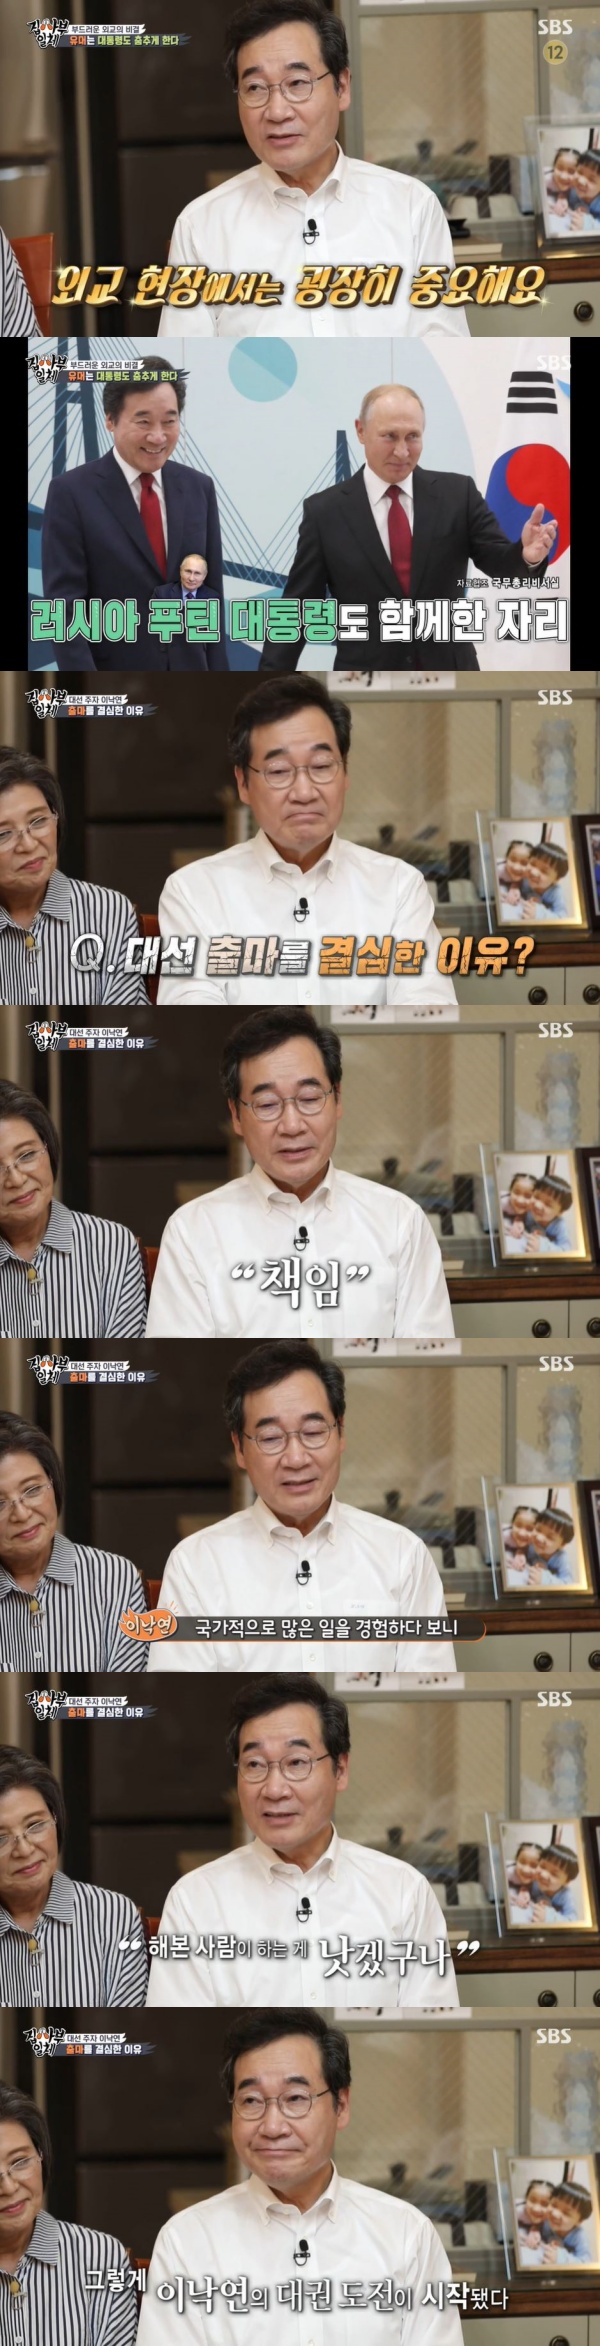 In the SBS entertainment program All The Butlers, which aired on the 3rd, Lee Nak-yeon, former Democratic Party leader, appeared as the last runner of the presidential election BIG 3 special feature, and revealed his life history as well as daily disclosure.Lee Nak-yeon, former prime minister, said, Im Ki-eung is very important in the diplomatic field, he said. I made a humorous speech at the Korea-Russia Business Forum in which President Putin participated.He also laughed at gags and showed steam smiles with video calls with his grandchildren.When Husband comes home, he changes into a comfortable pajamas, from his honeymoon to the present, said Kim Sook-hee, opening a drawer in his room and showing seasonal pajamas.Lee was fortunate to have been responsible for the reason that he decided to run for the presidential election even though he was the end of the specs through the 5th National Assembly, the governor, and the party.I experienced a lot of things nationwide and thought, If this is the case, it would be better for someone who has done it. The people also showed me a lot of expectations.Meanwhile, All The Butlers is a life tutoring entertainment program with youths full of question marks and myway geek masters.It airs every Sunday at 6:25 p.m.Photo SBS broadcast screen capture